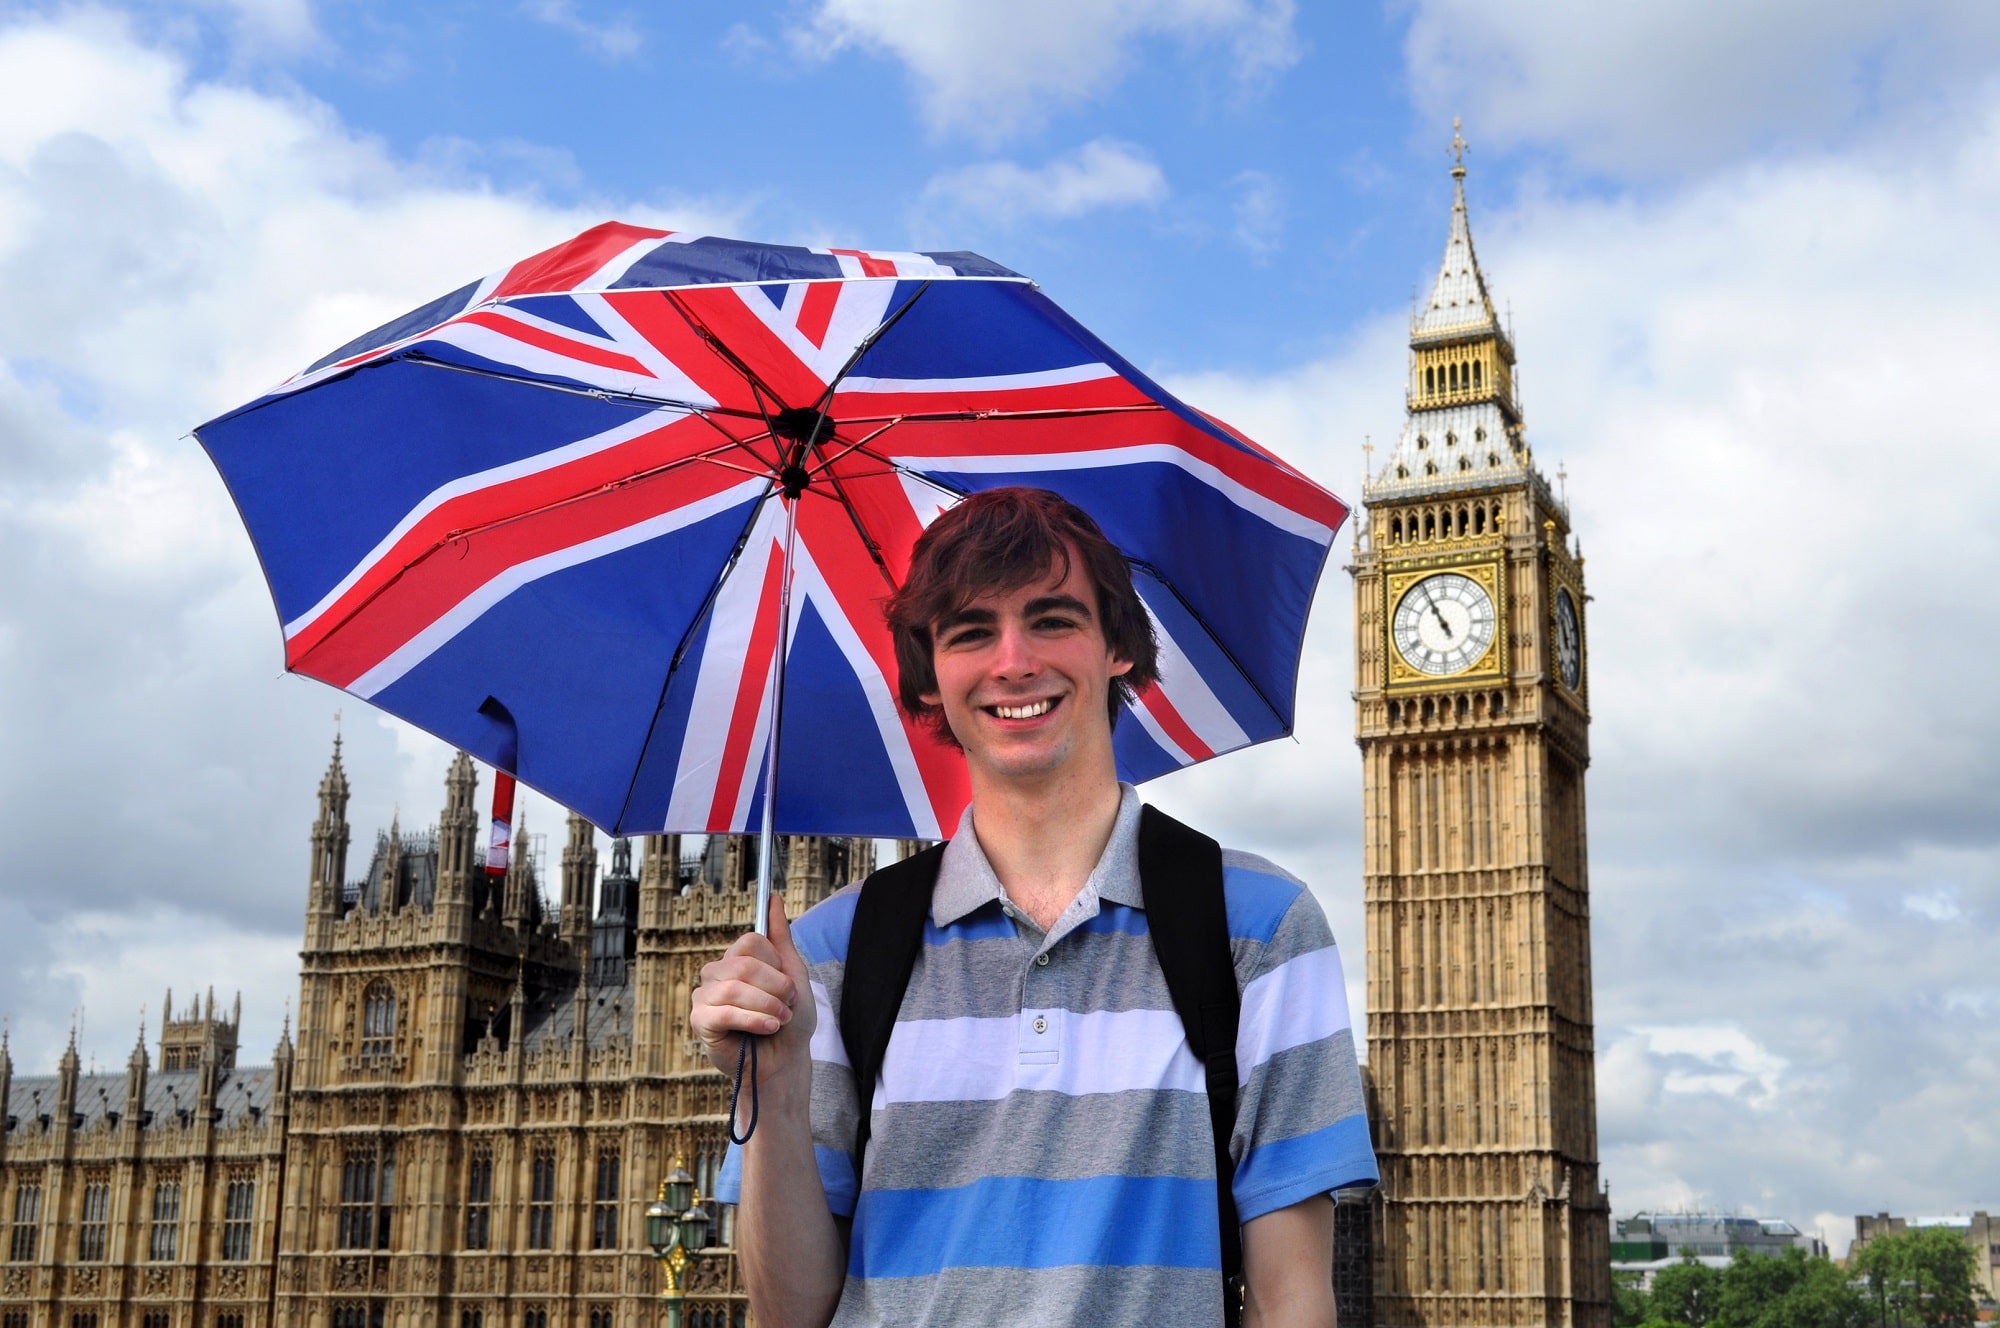 5 Interesting Things To Do in UK While Studying